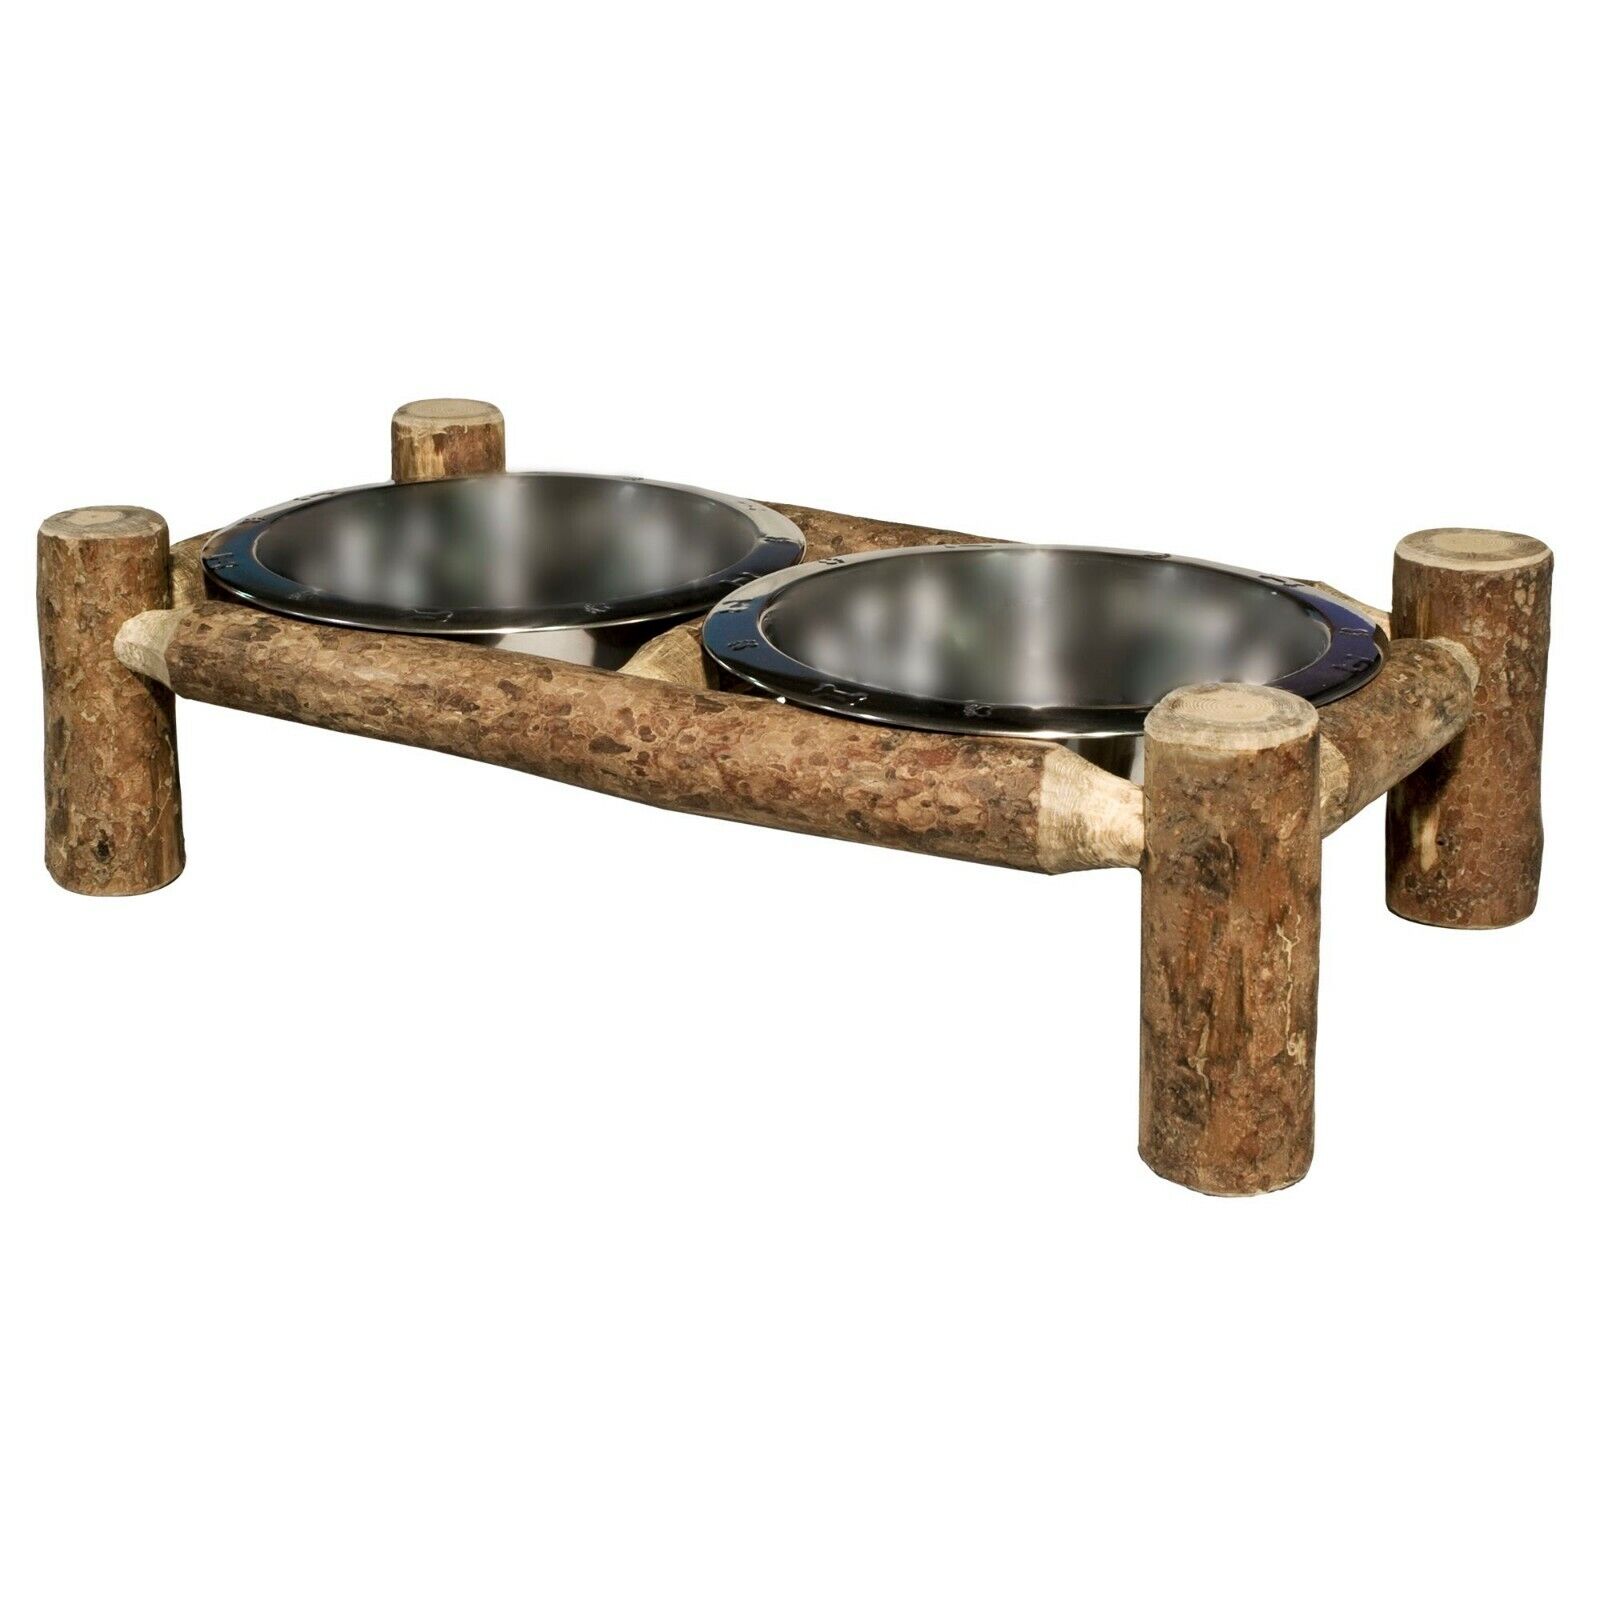 Rustic Dog Feeder Log Cabin Style for Larger Dogs Pet Dish Set Amish Made 